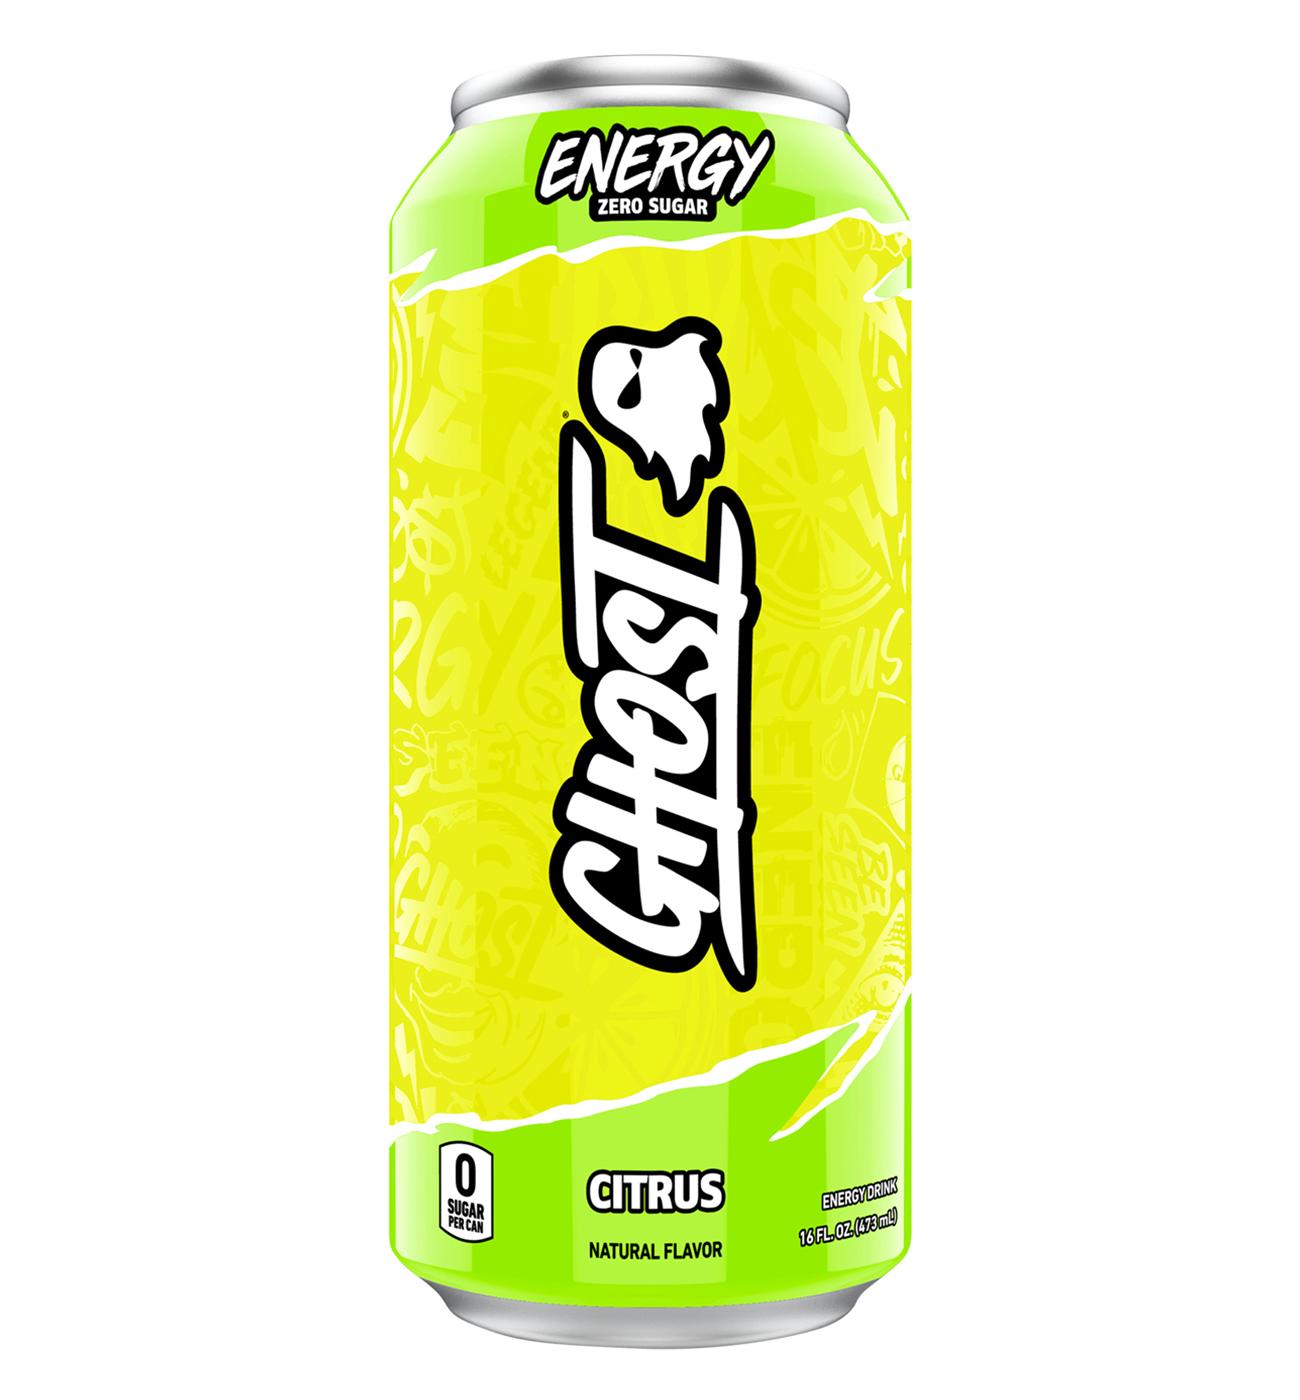 Ghost Energy Citrus Drink; image 1 of 2